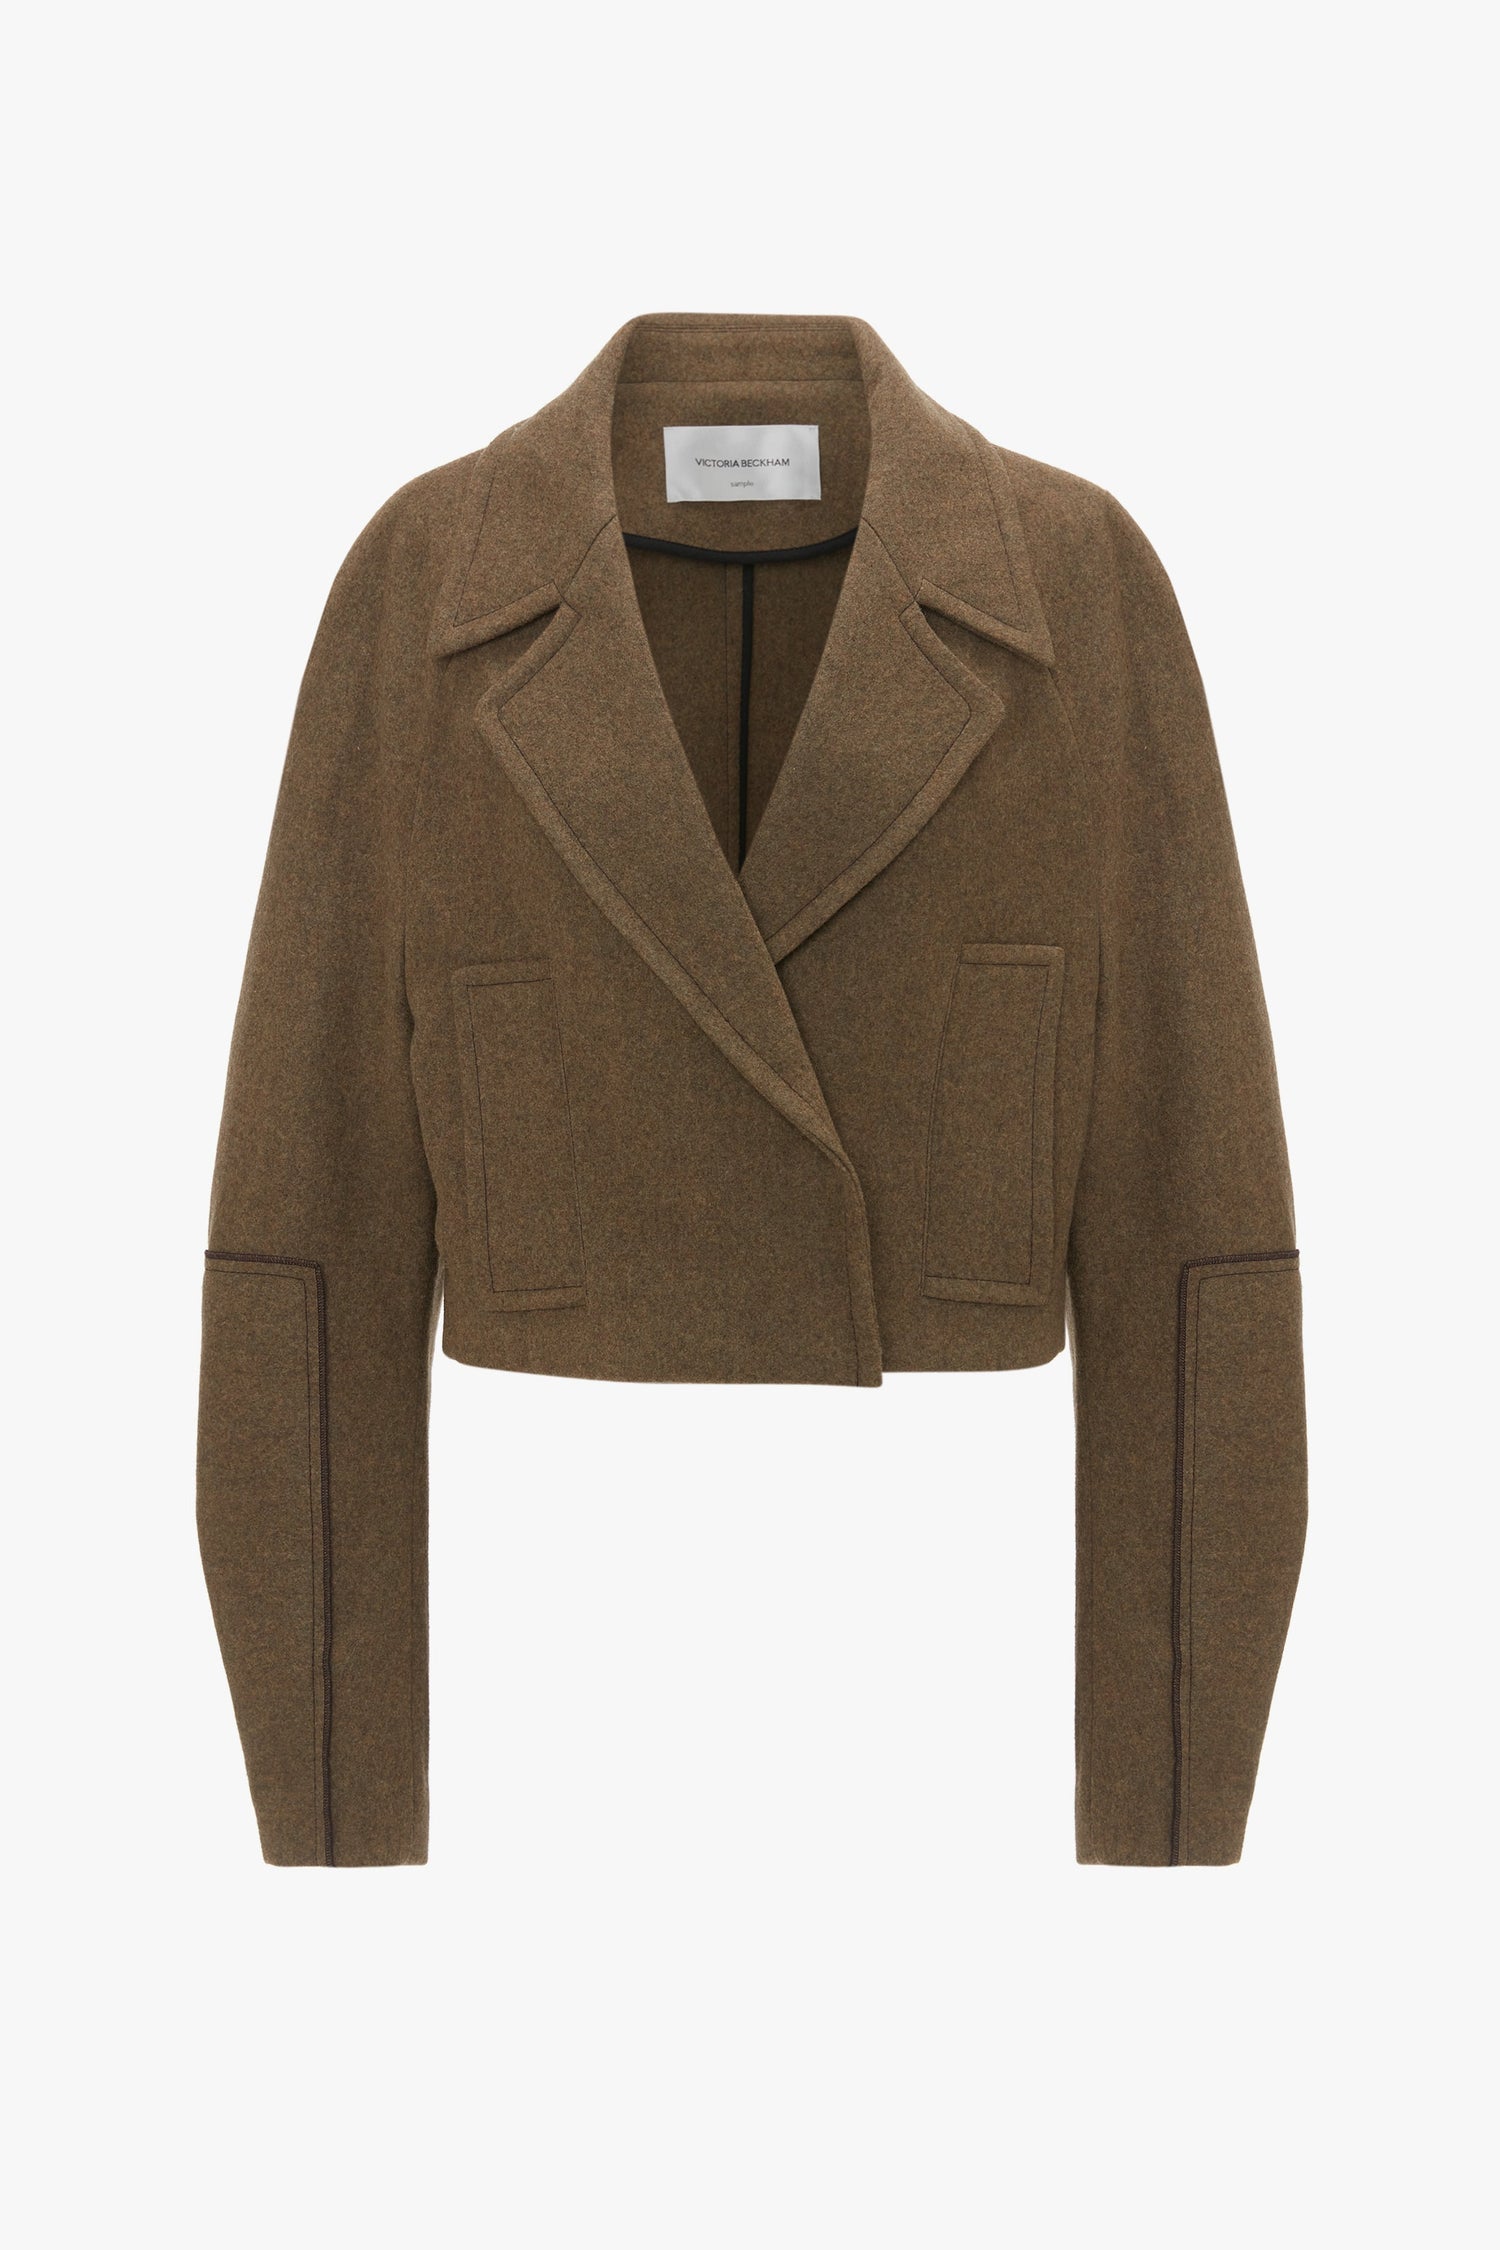 A waist-defining brown Cropped Pea Coat In Khaki by Victoria Beckham in luxurious merino wool, featuring a wide lapel, two front pockets, and intricate seam details.